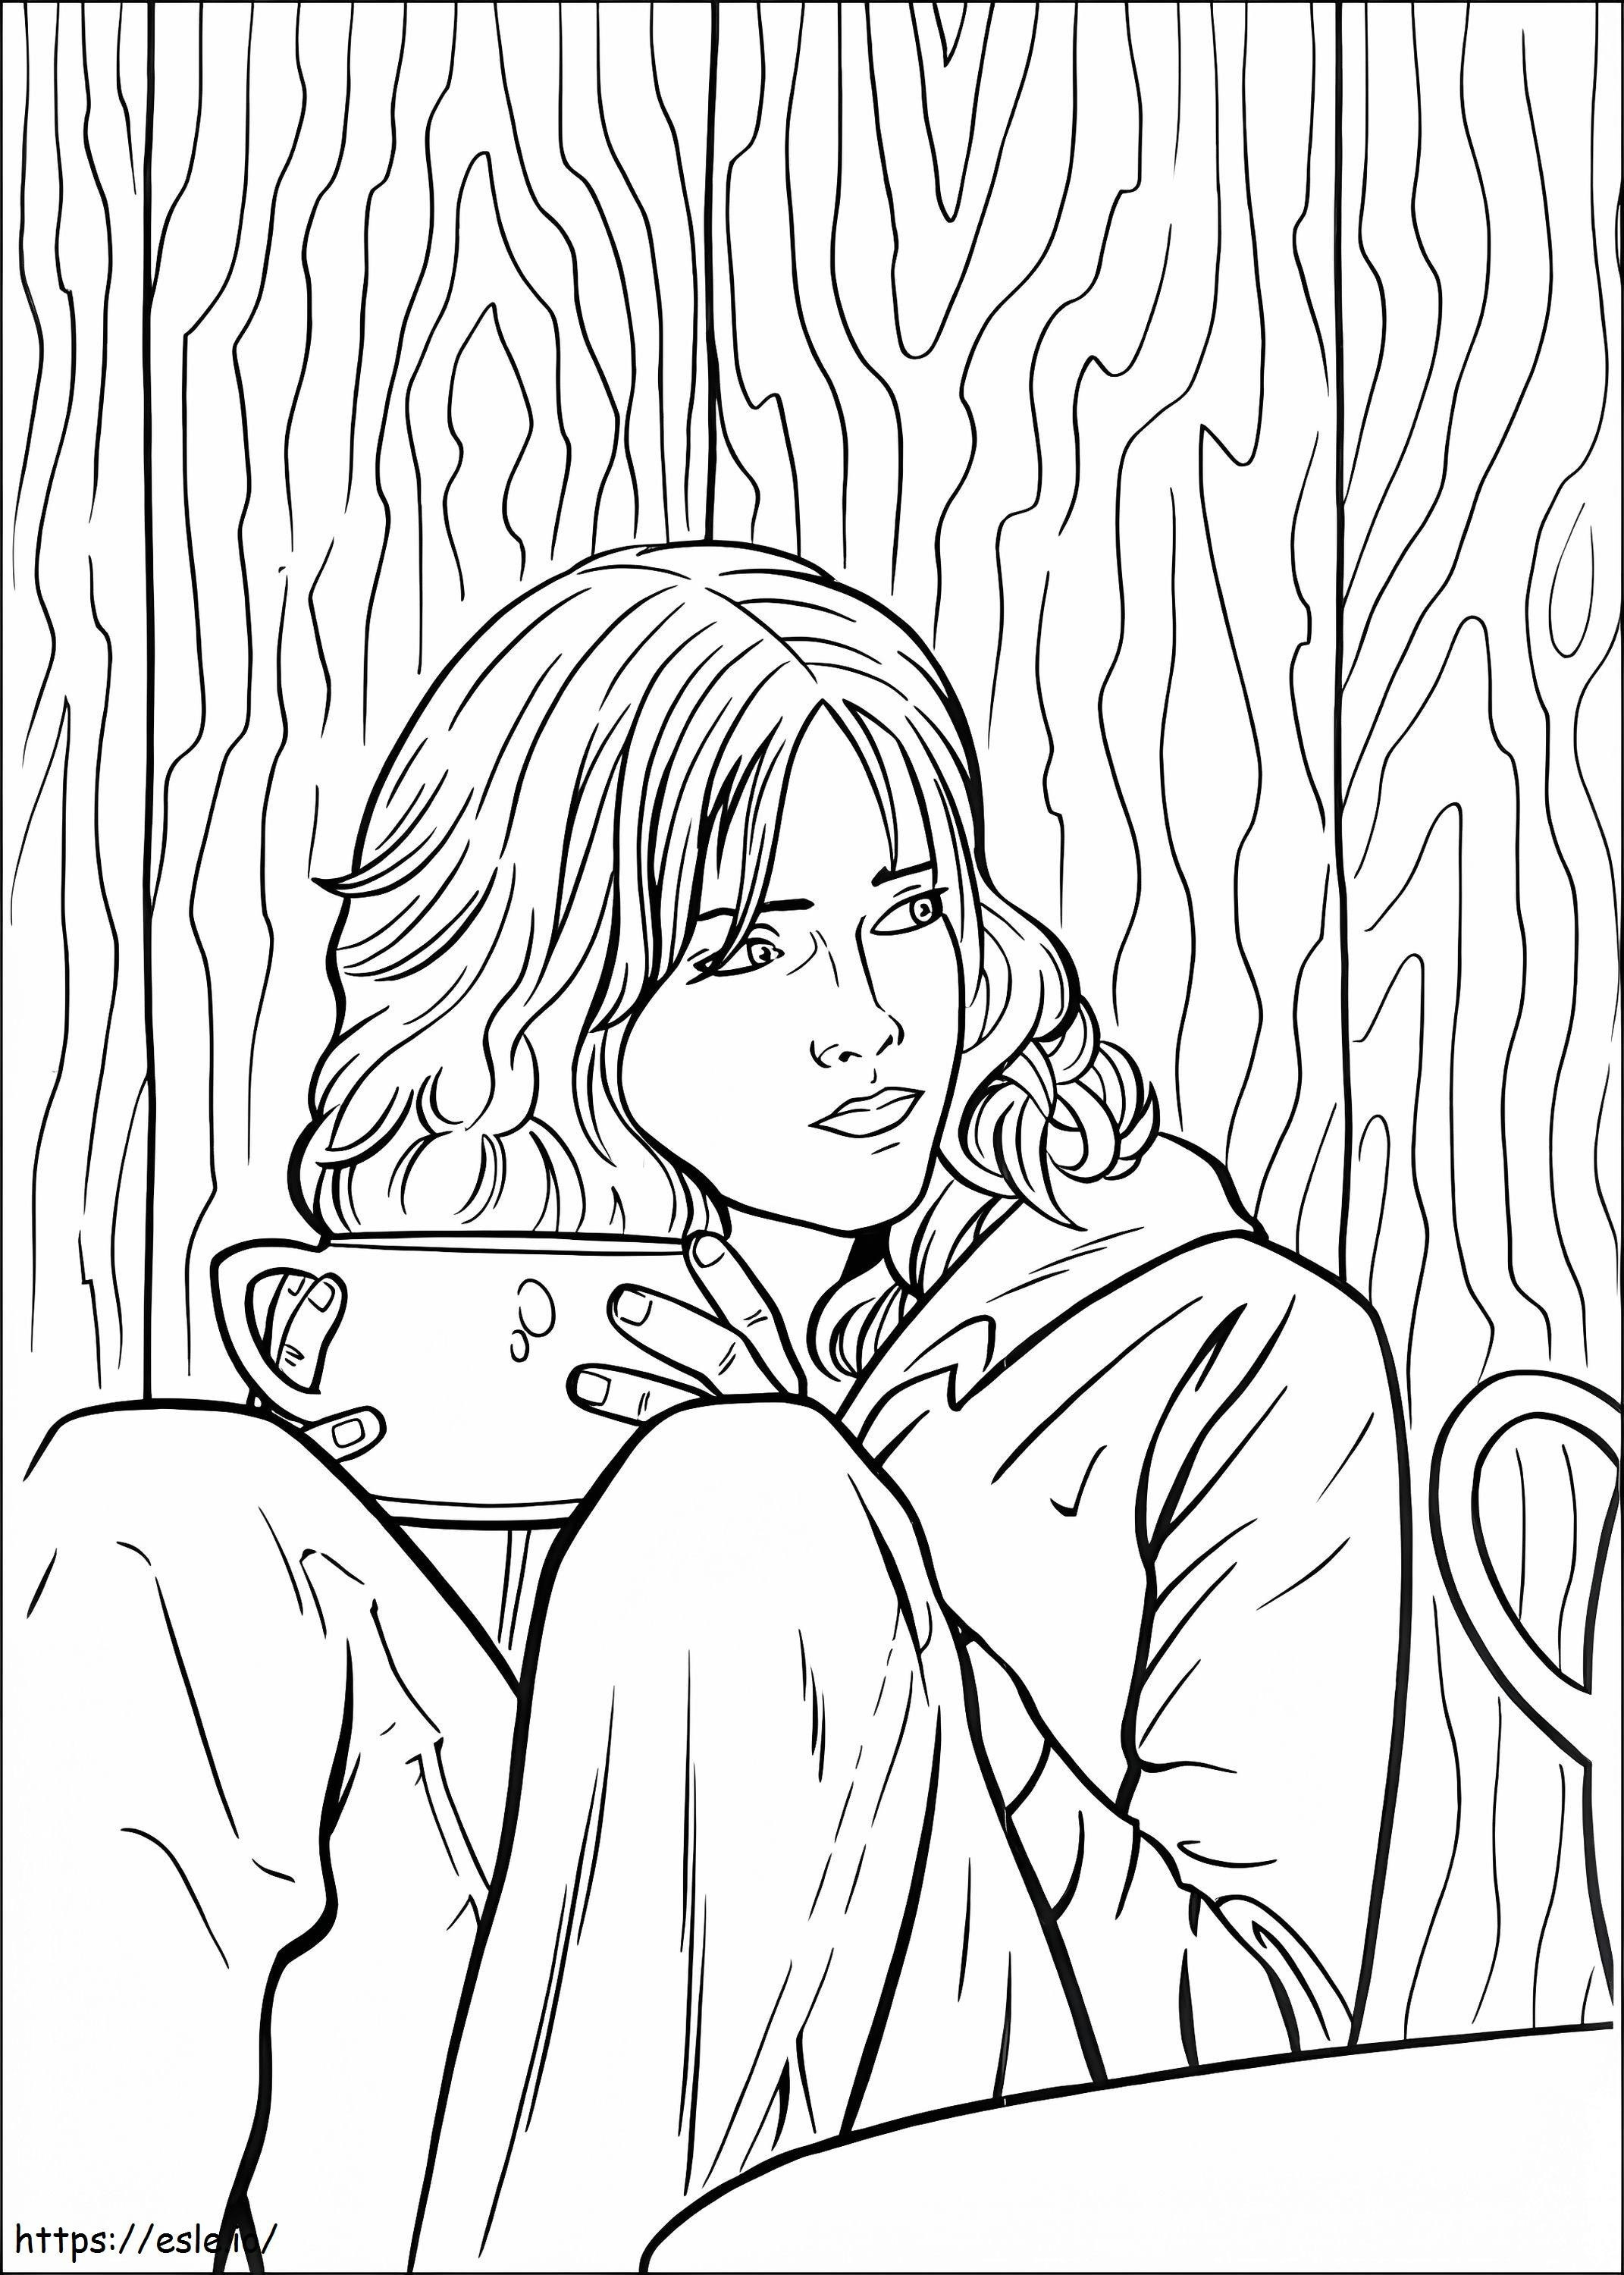 Hermione Granger 3 coloring page